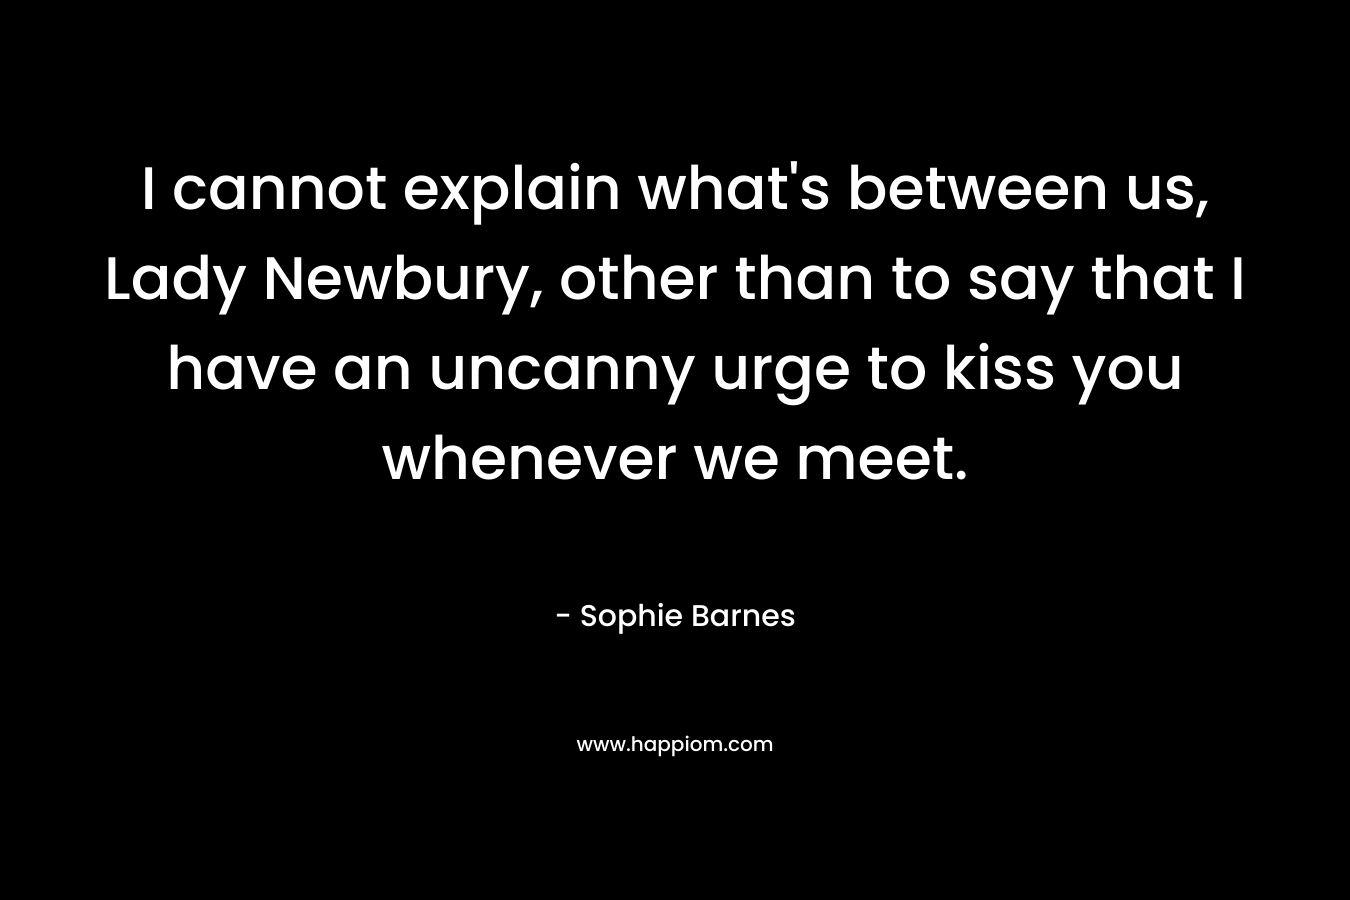 I cannot explain what’s between us, Lady Newbury, other than to say that I have an uncanny urge to kiss you whenever we meet. – Sophie Barnes